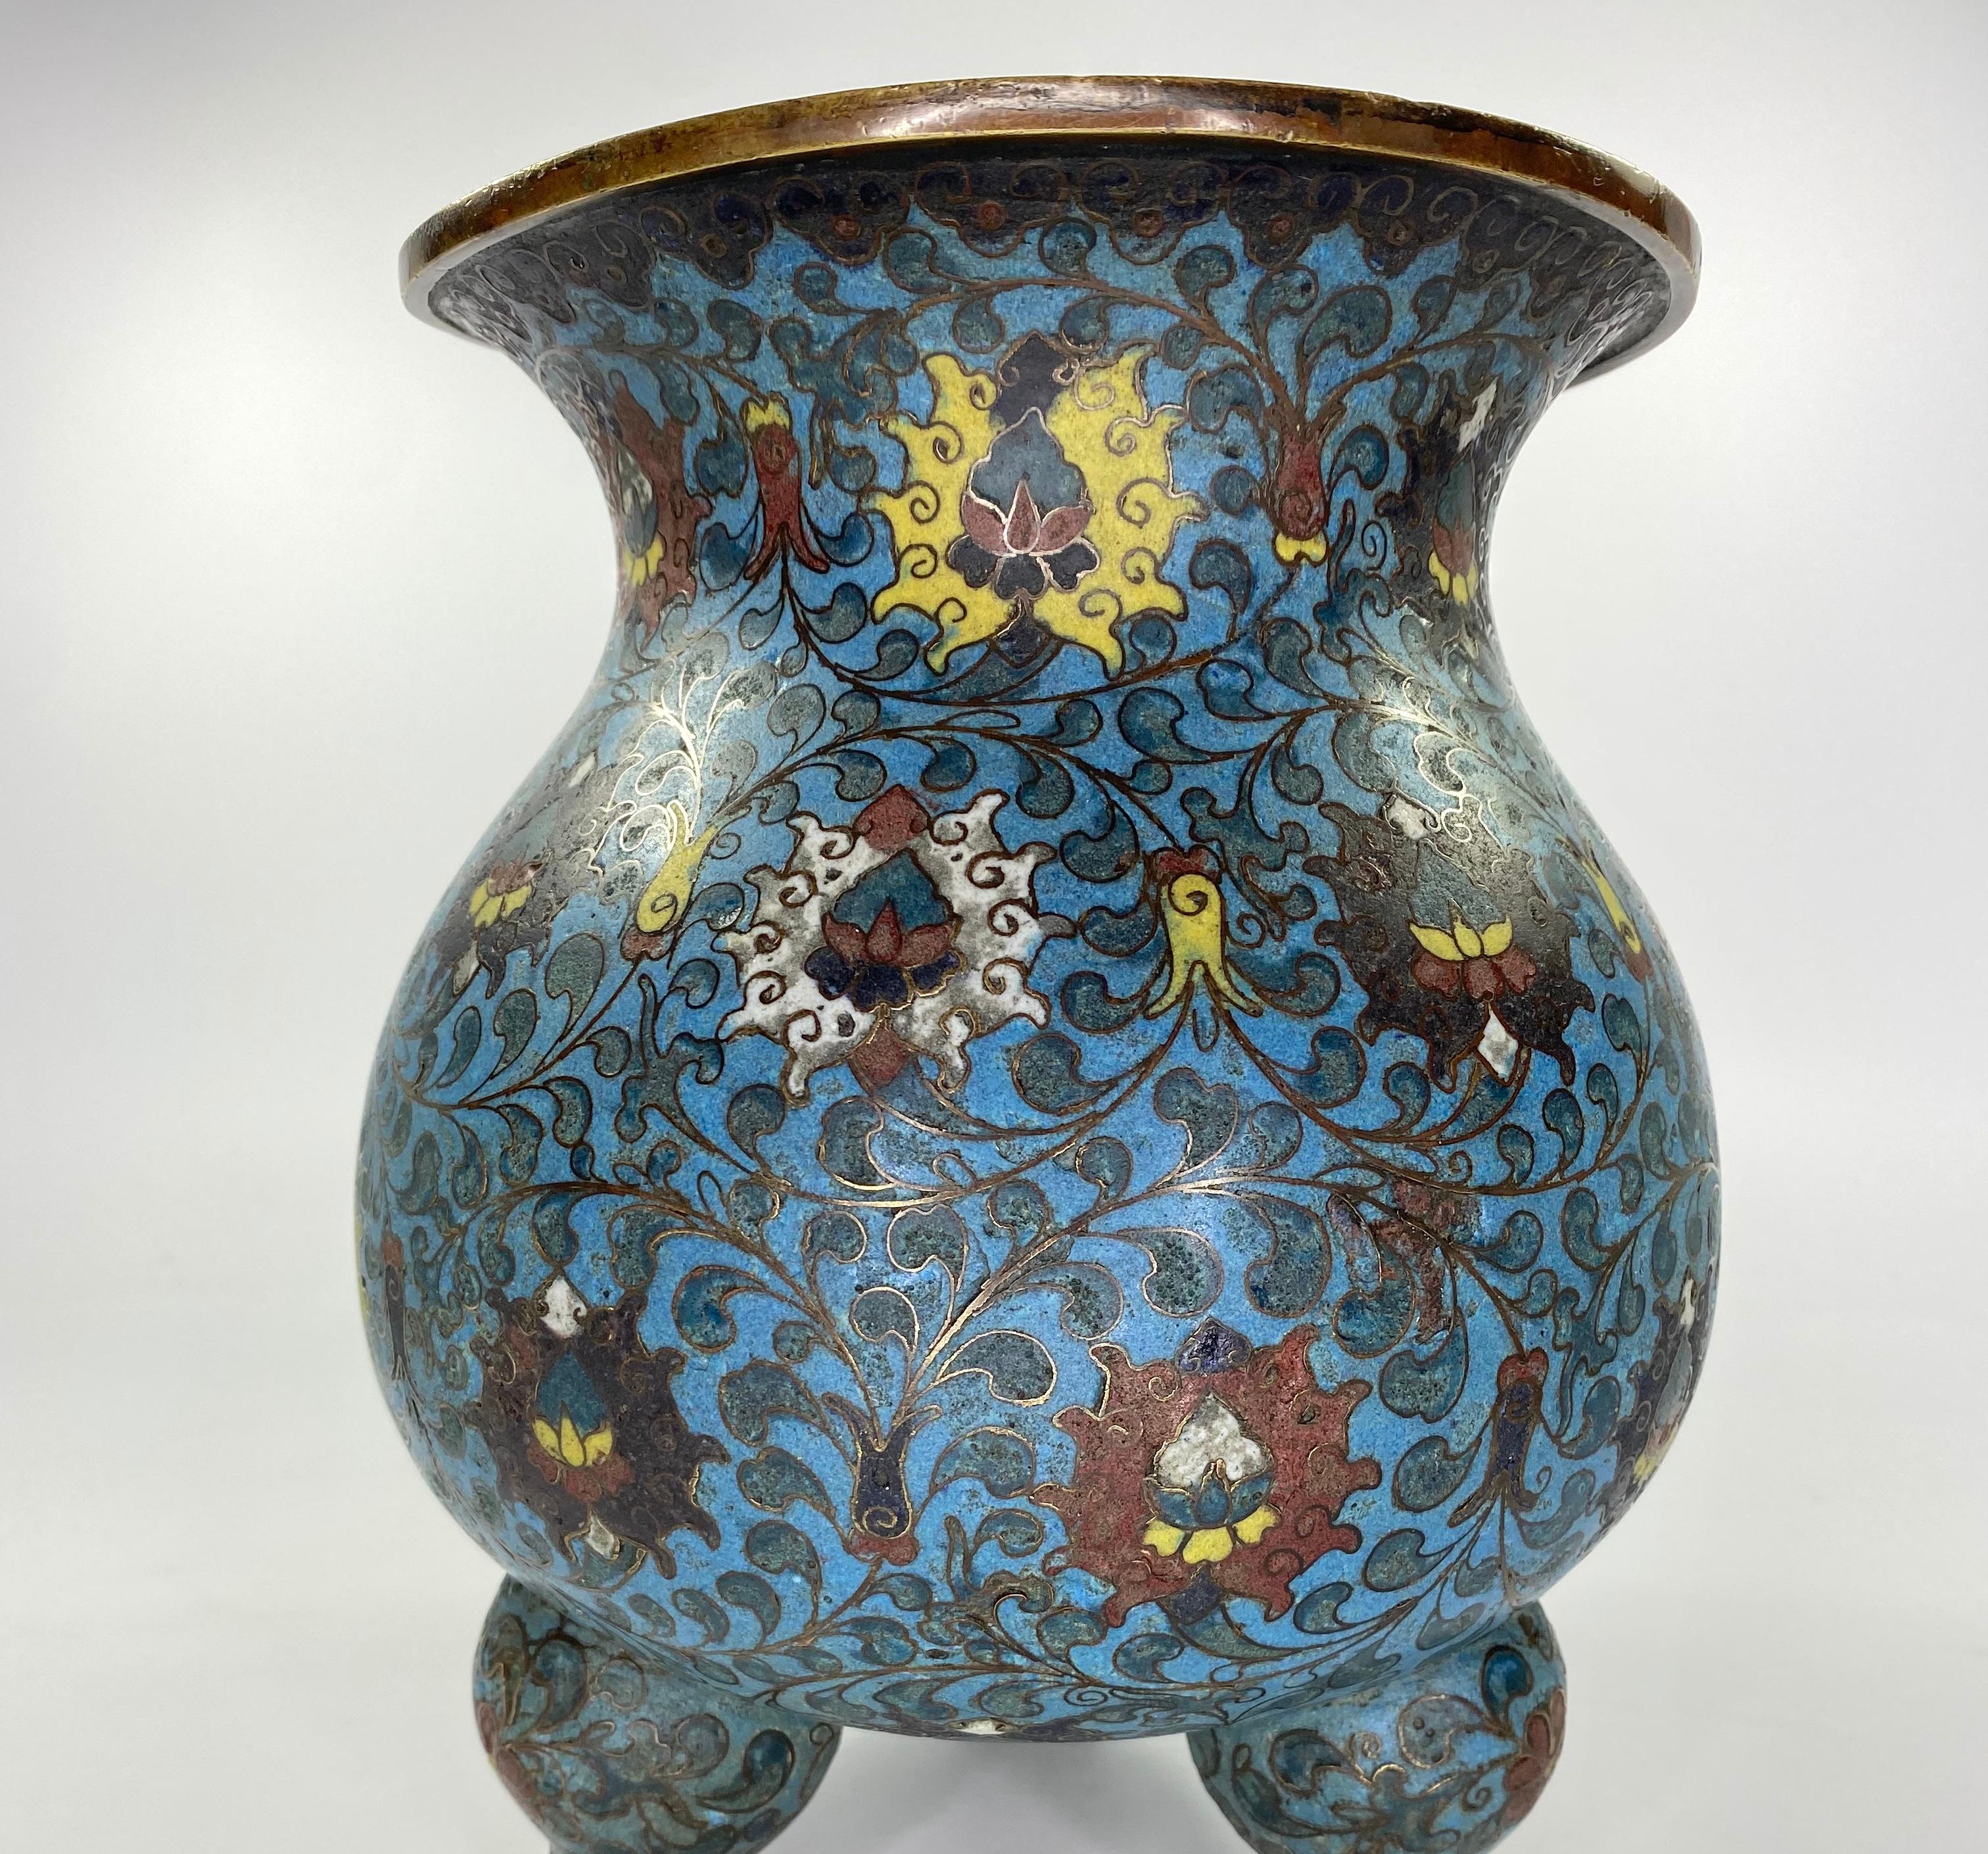 18th Century and Earlier Chinese Cloisonne Enamel Censer, 17th Century, Ming Dynasty